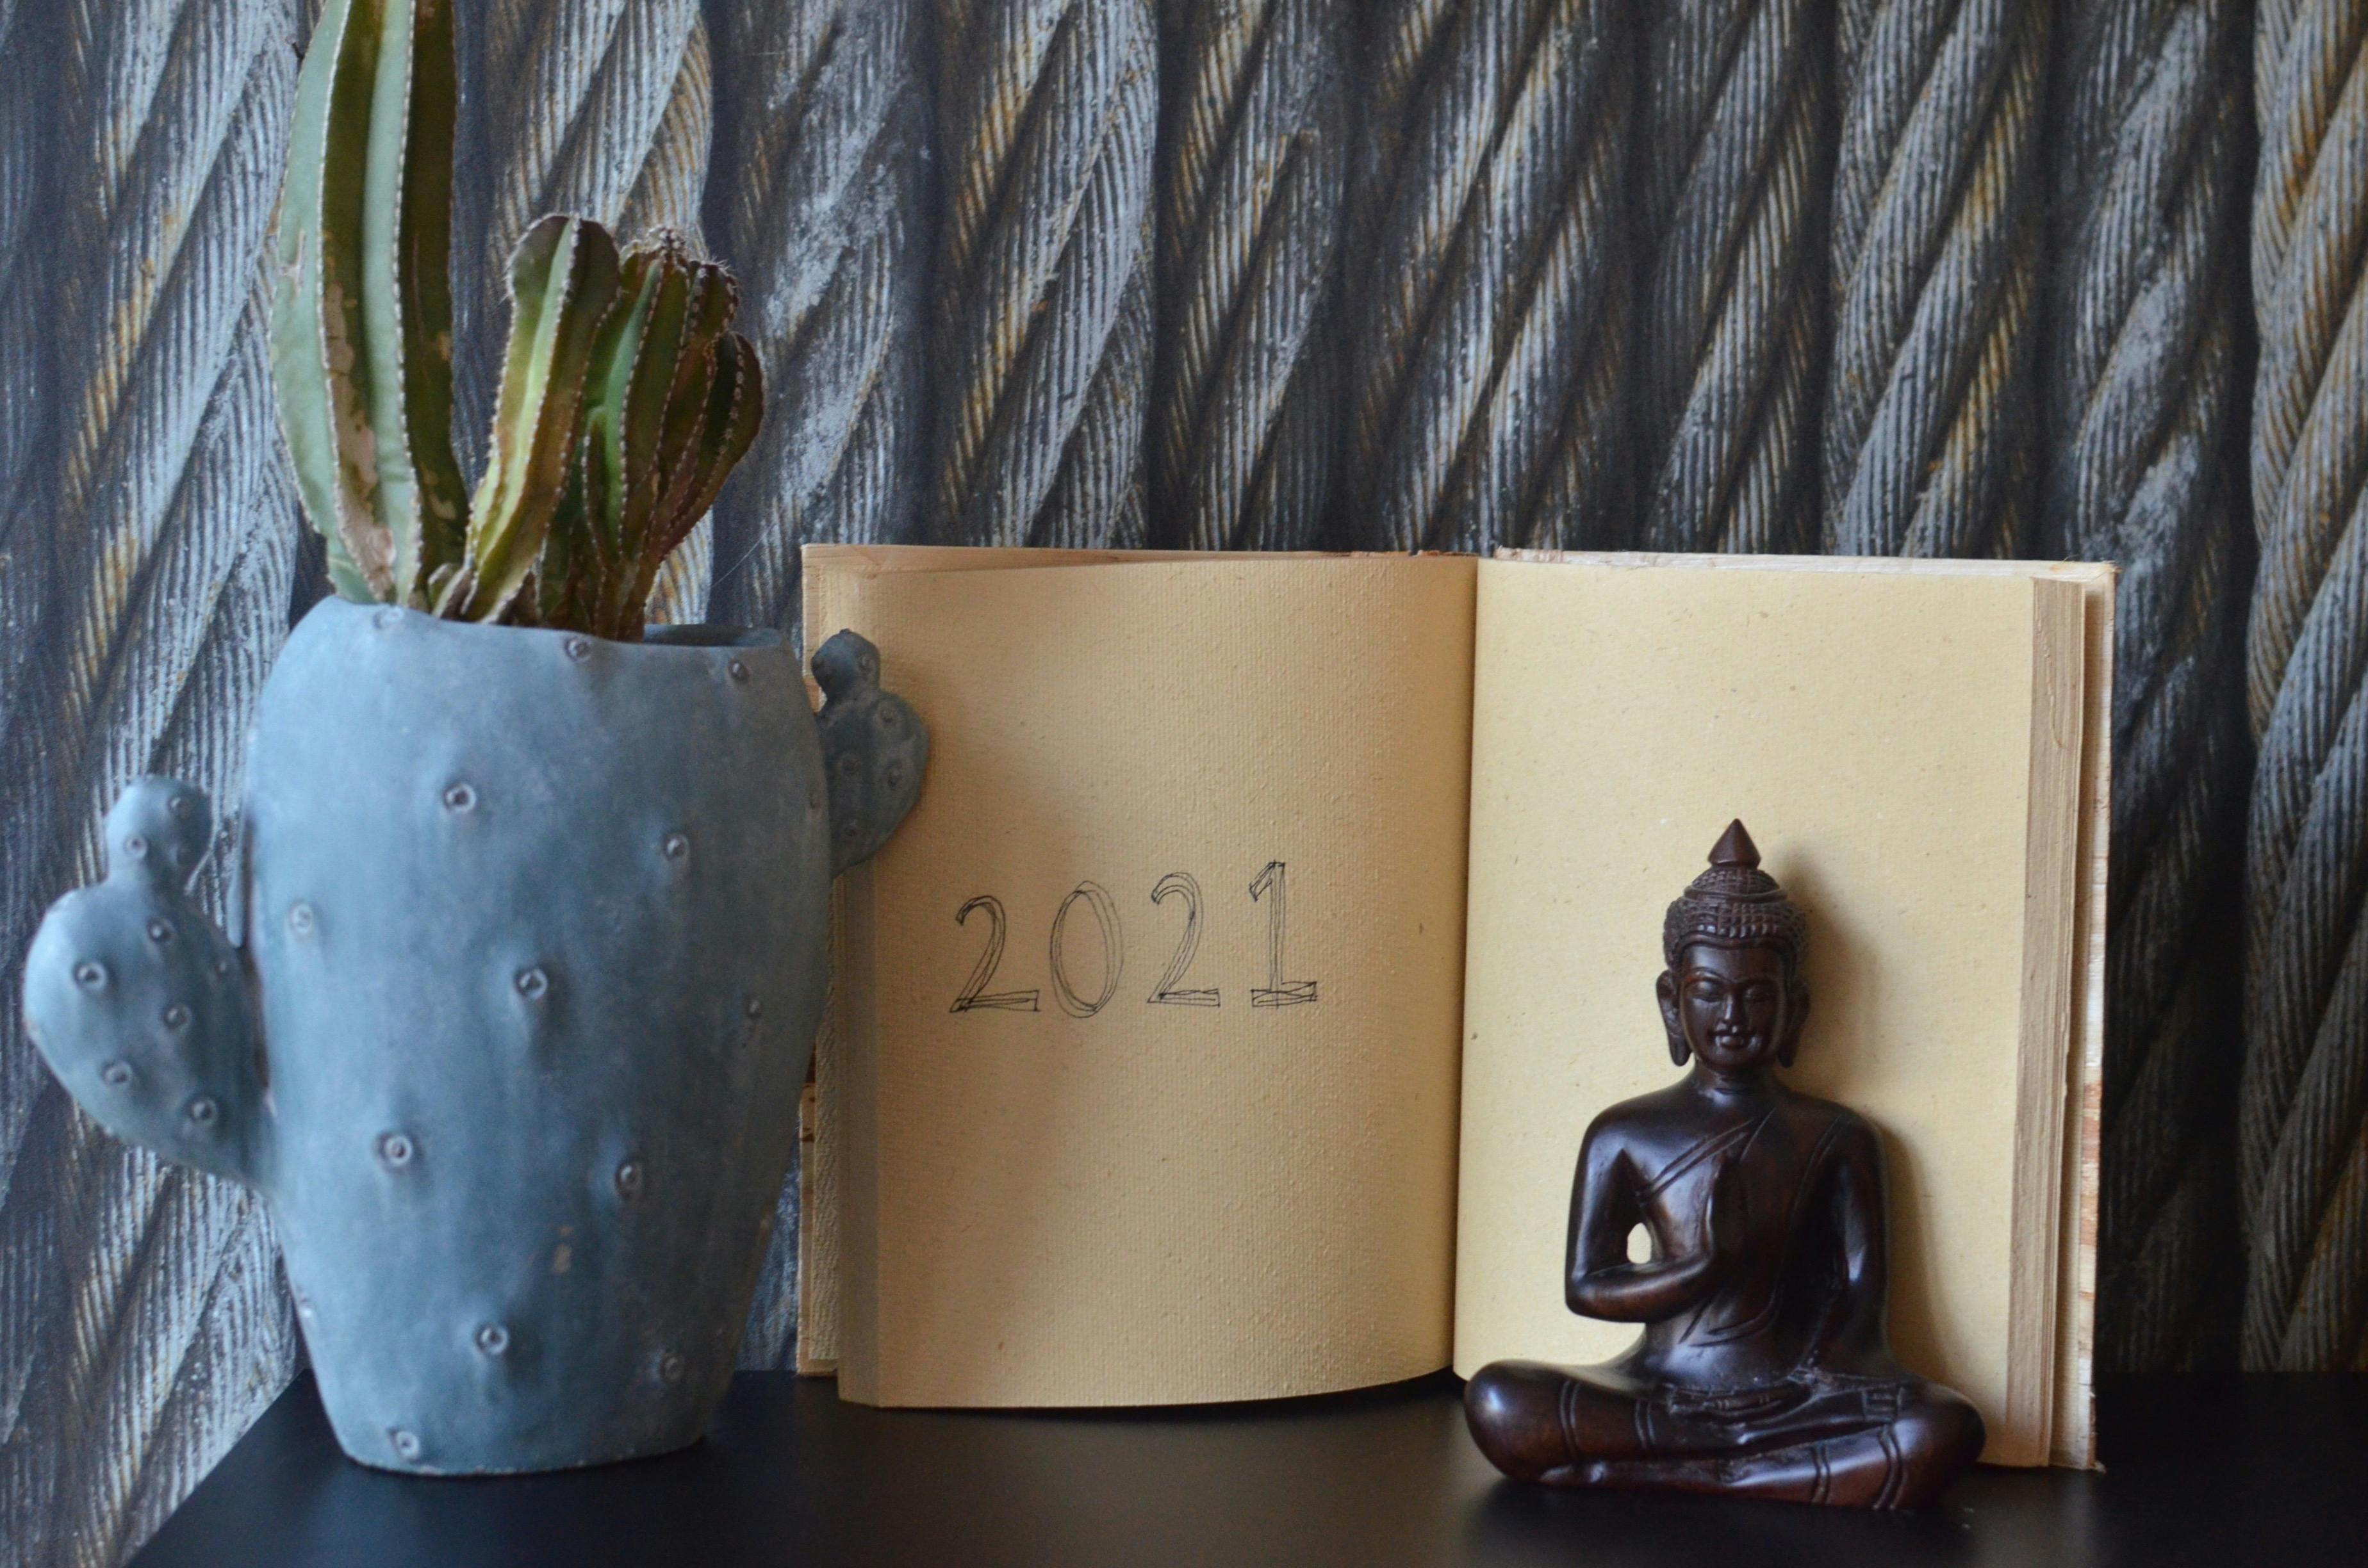 cacti in a pot buddha figurine and an open notebook with